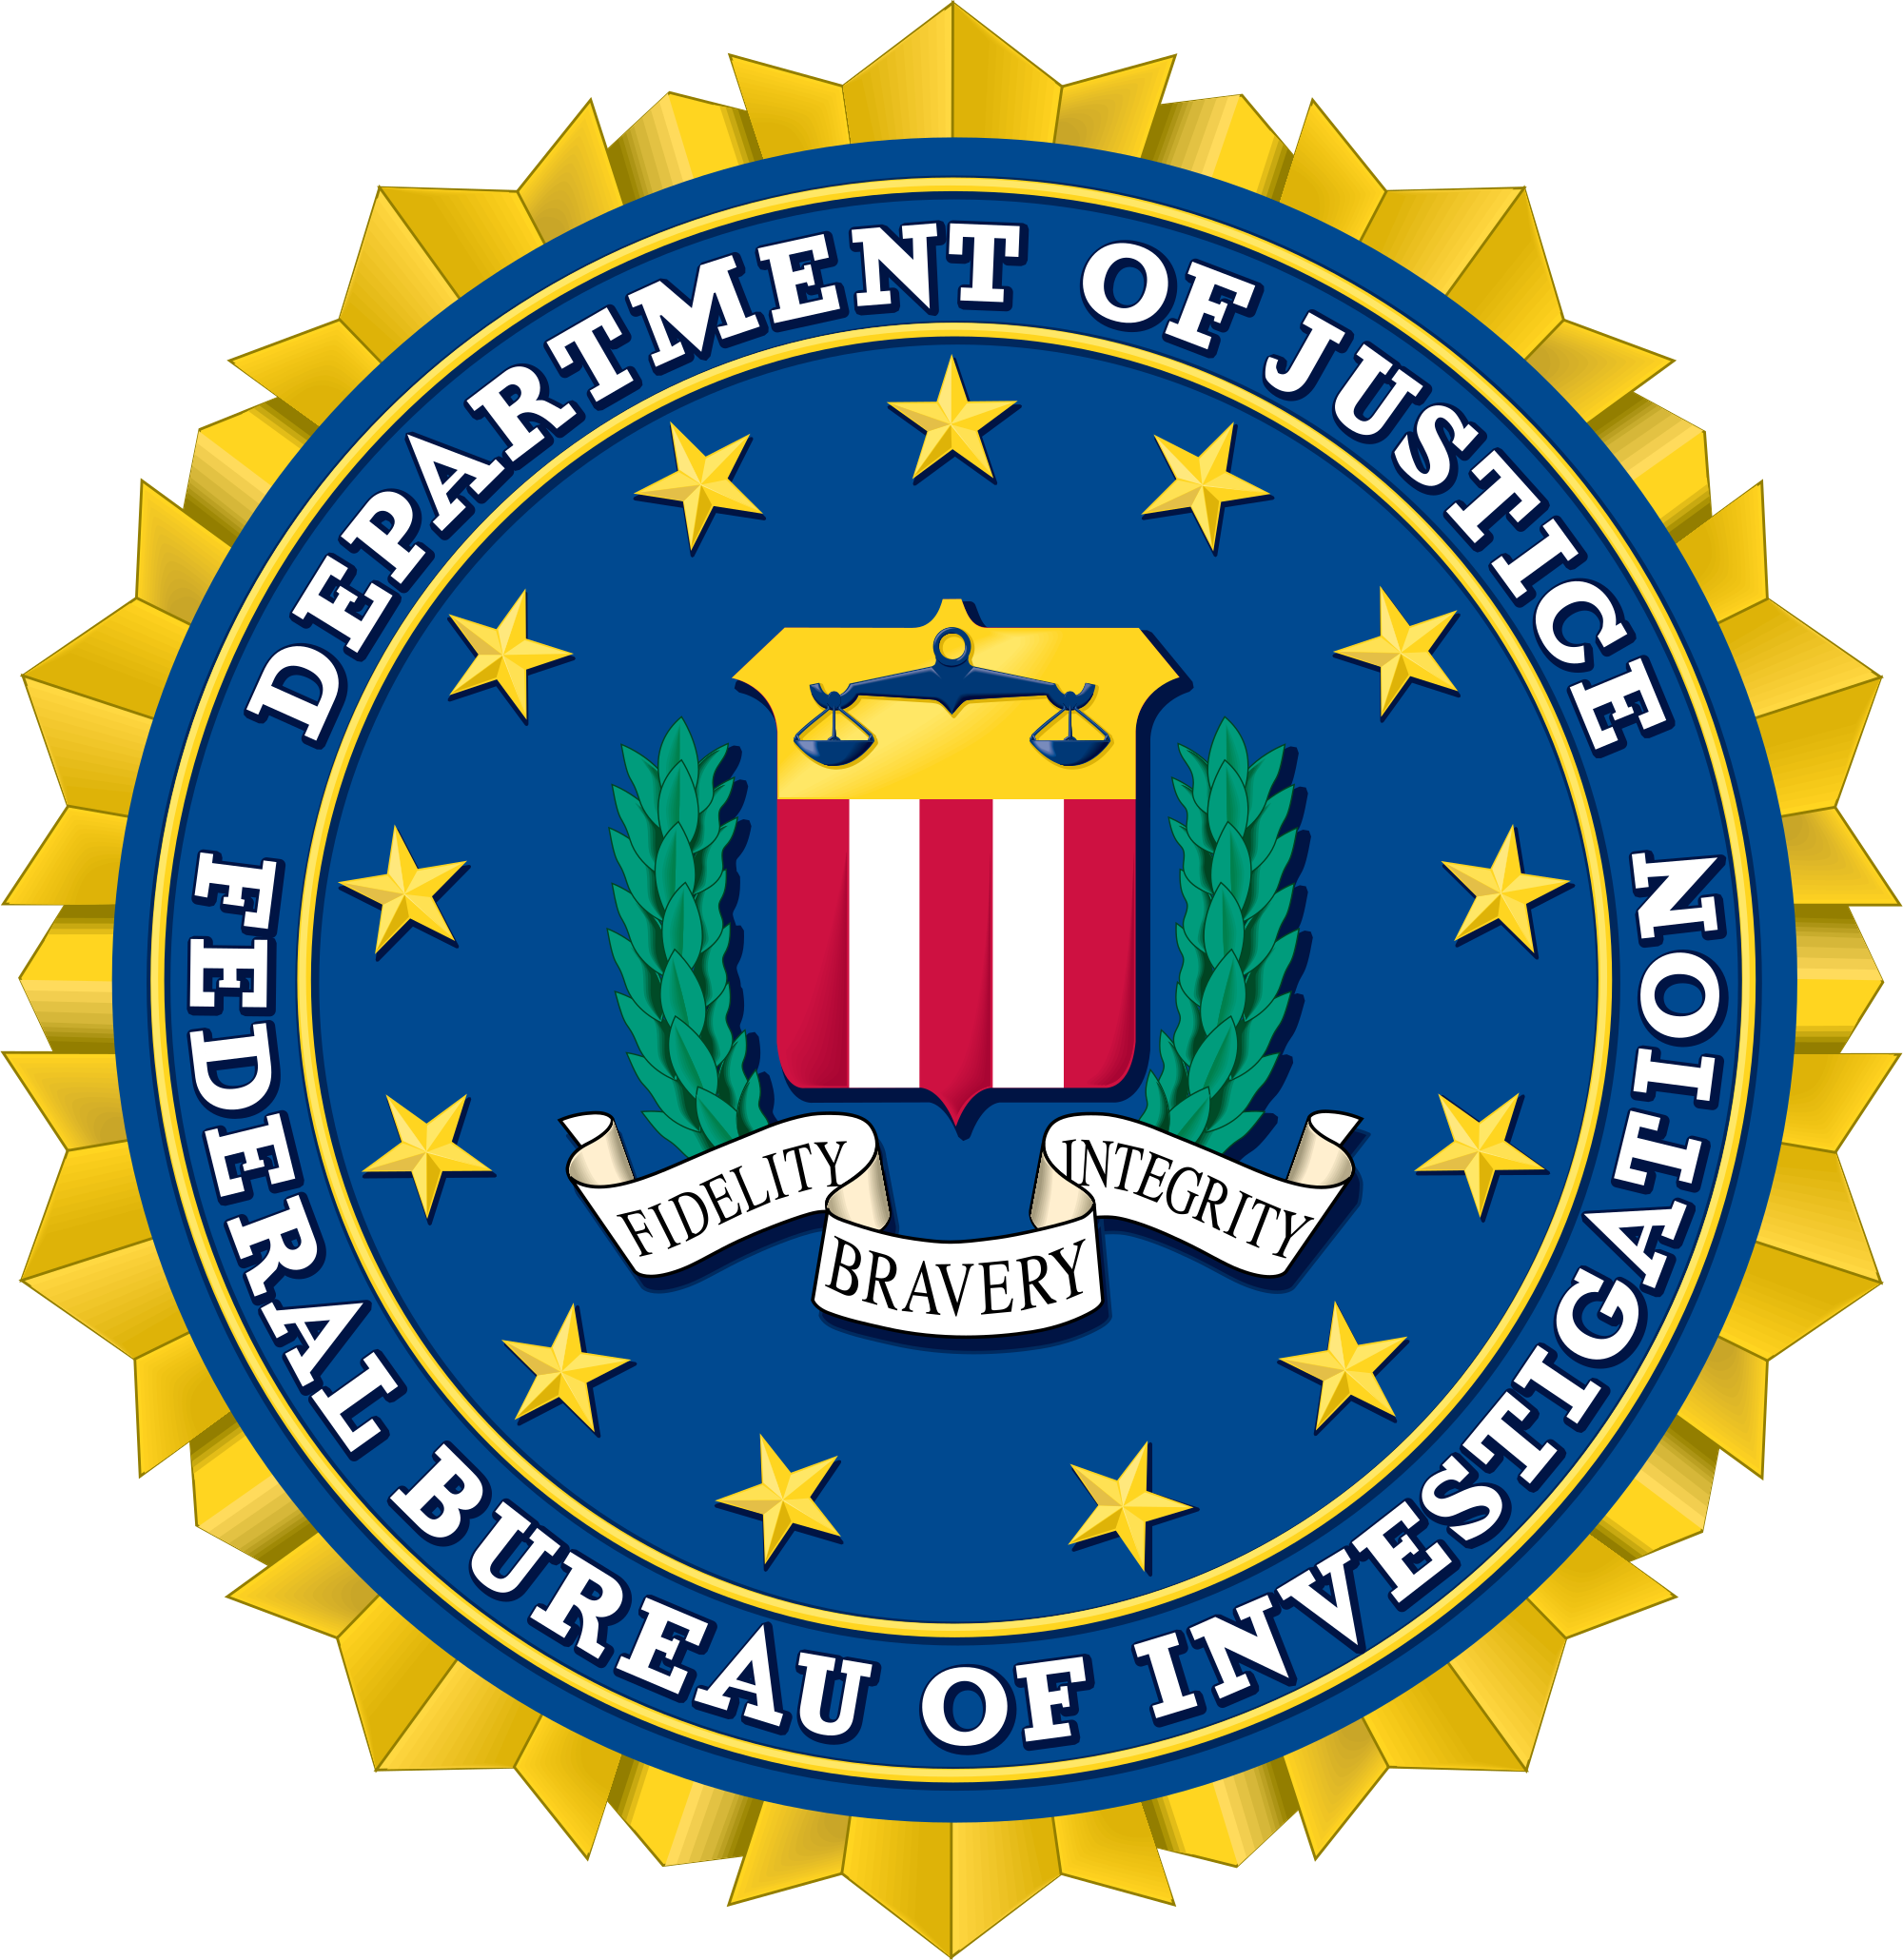 Seal_of_the_Federal_Bureau_of_Investigation.svg.png